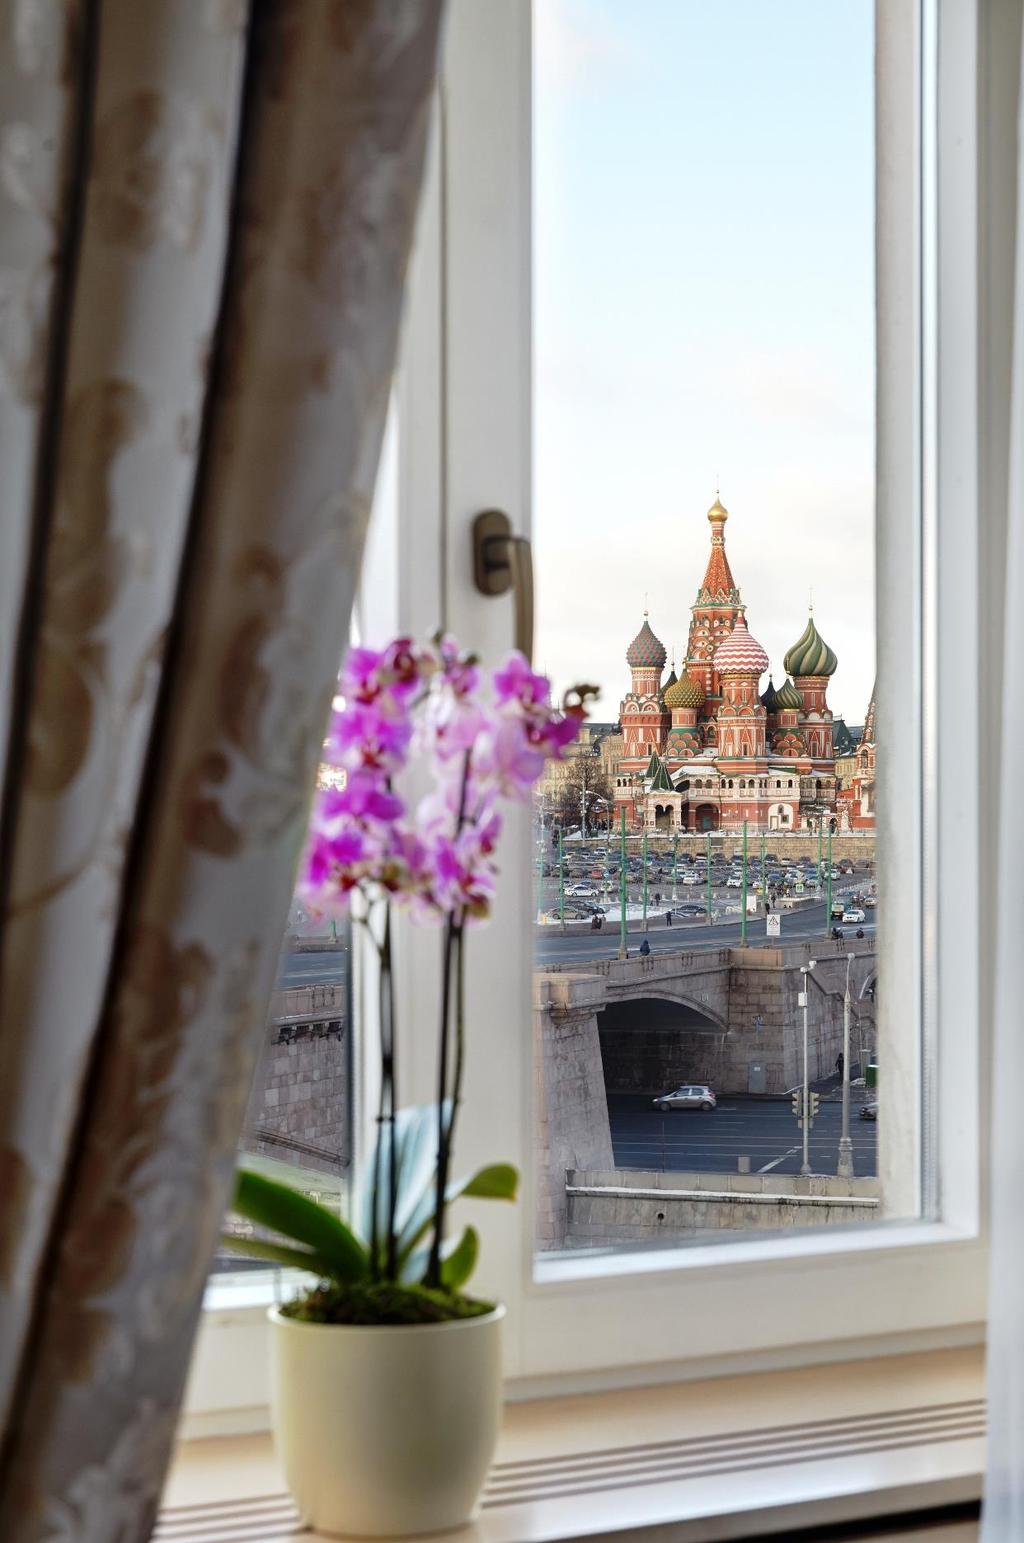 Hotel Baltschug Kempinski Moscow Welcome to Hotel Baltschug Kempinski Moscow The Place to Be We are delighted to invite you on an unforgettable journey into the world of European luxury - one that s